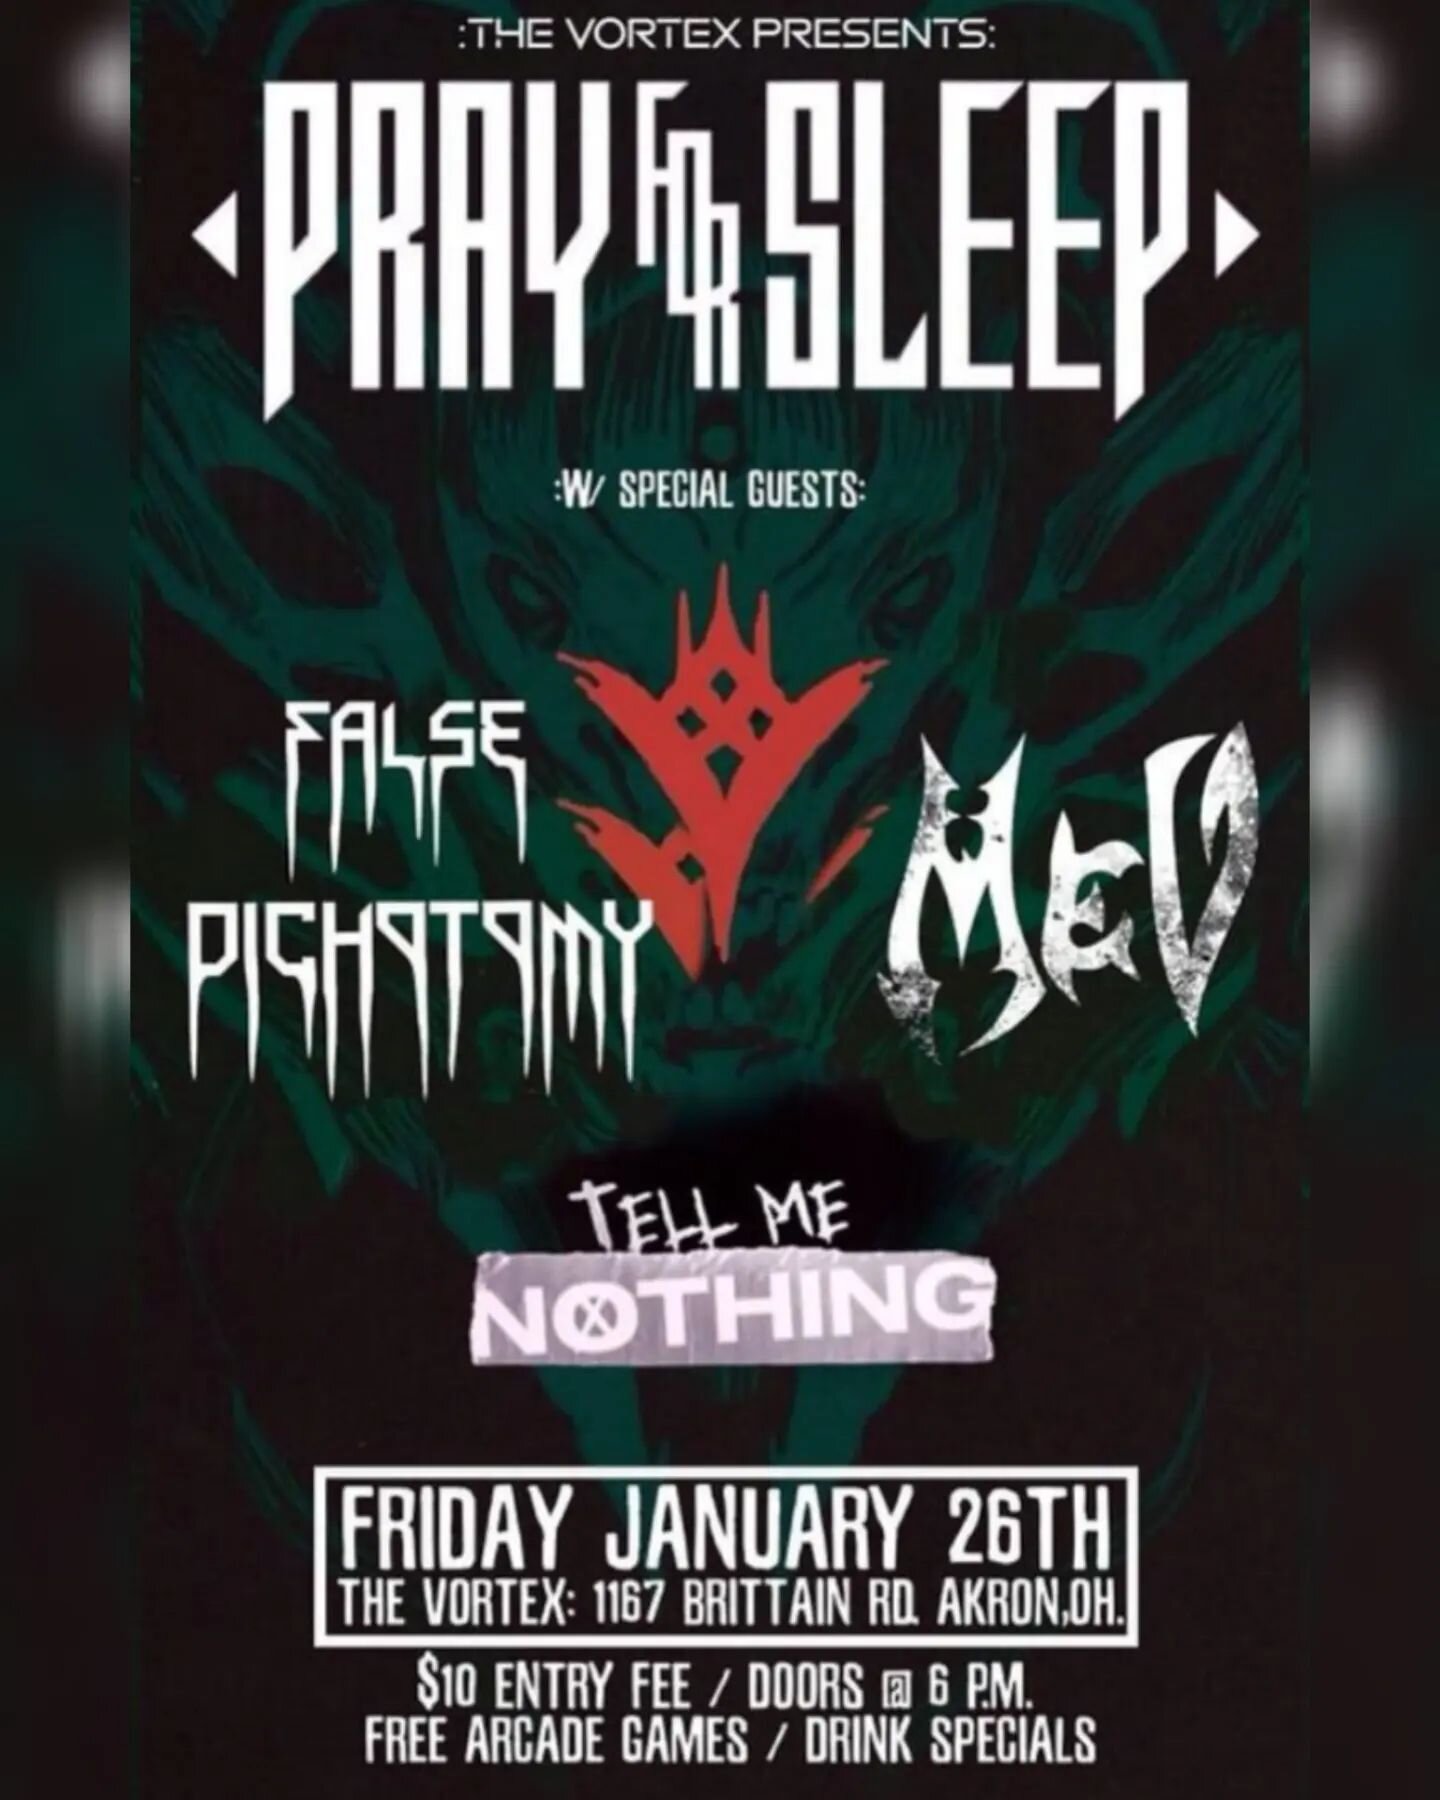 JANUARY SHOWS KEEP COMING! 
We are heading back to The Vortex in Akron January 26th with the homies @falsedichotomyband, MeV and @tellmenothingband!
&bull;
Tickets are just $10 at the door and we will be playing new song and have new merch! Don't mis